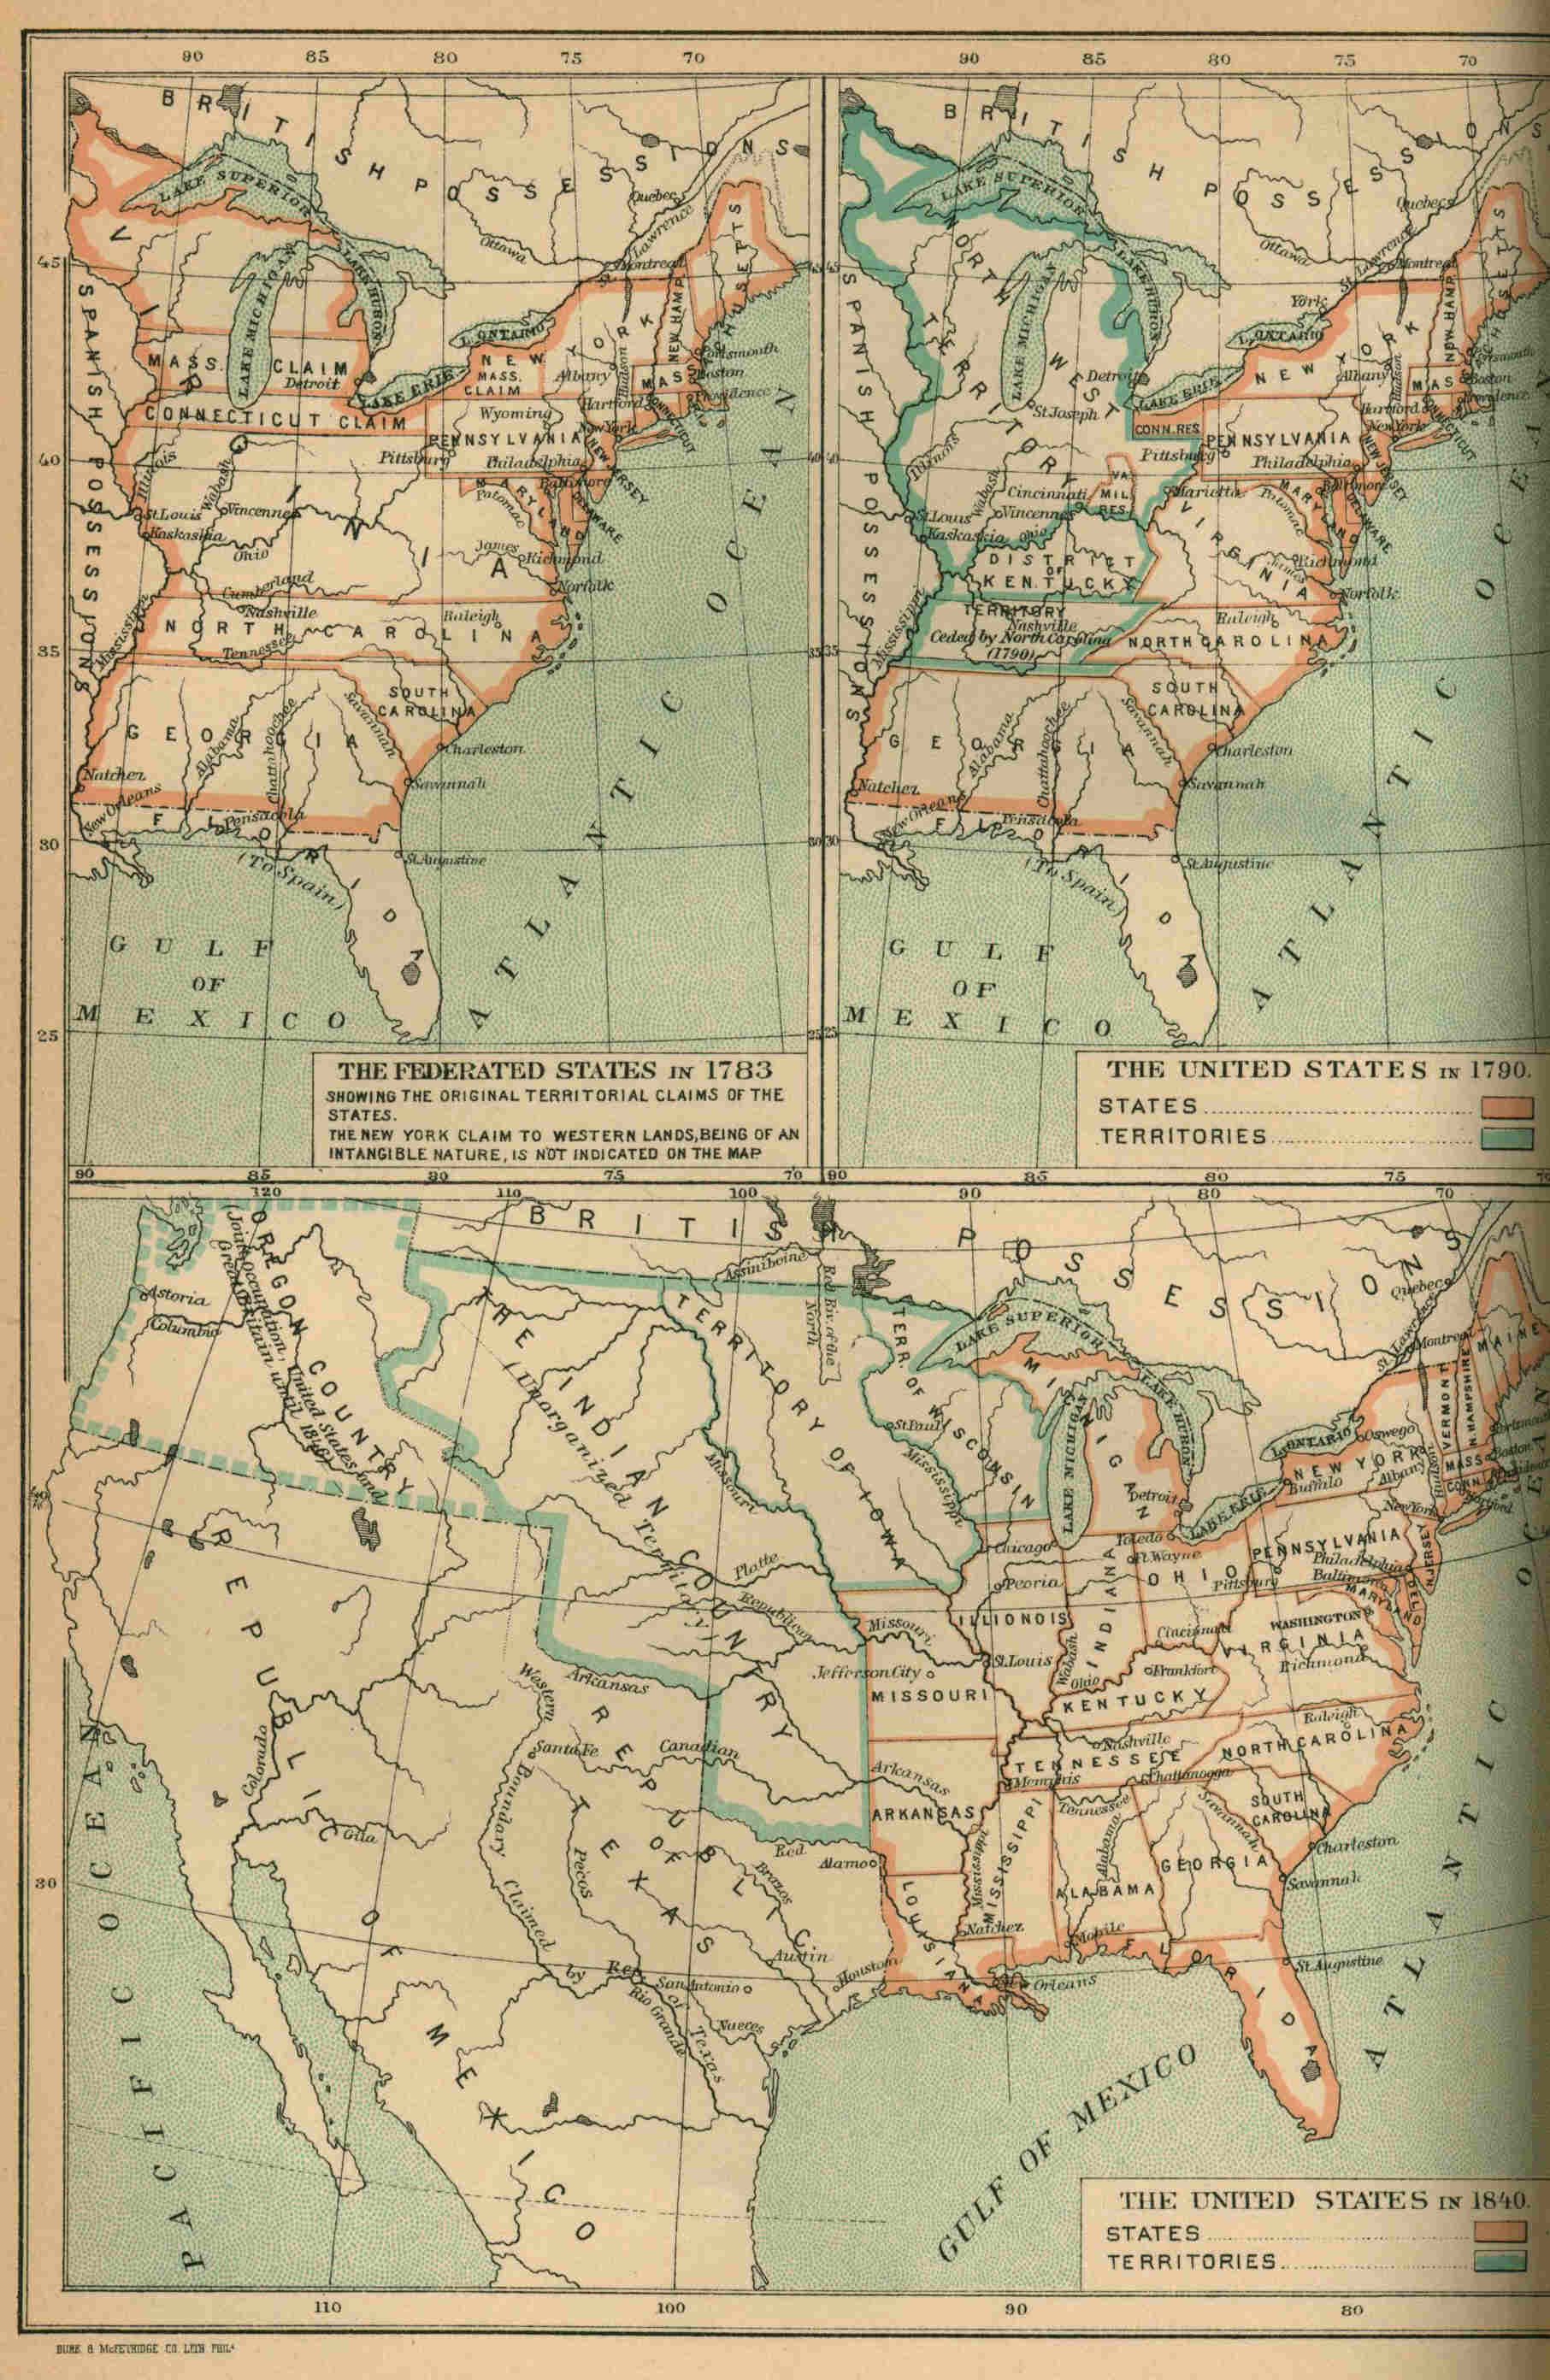 The United States in 1860.